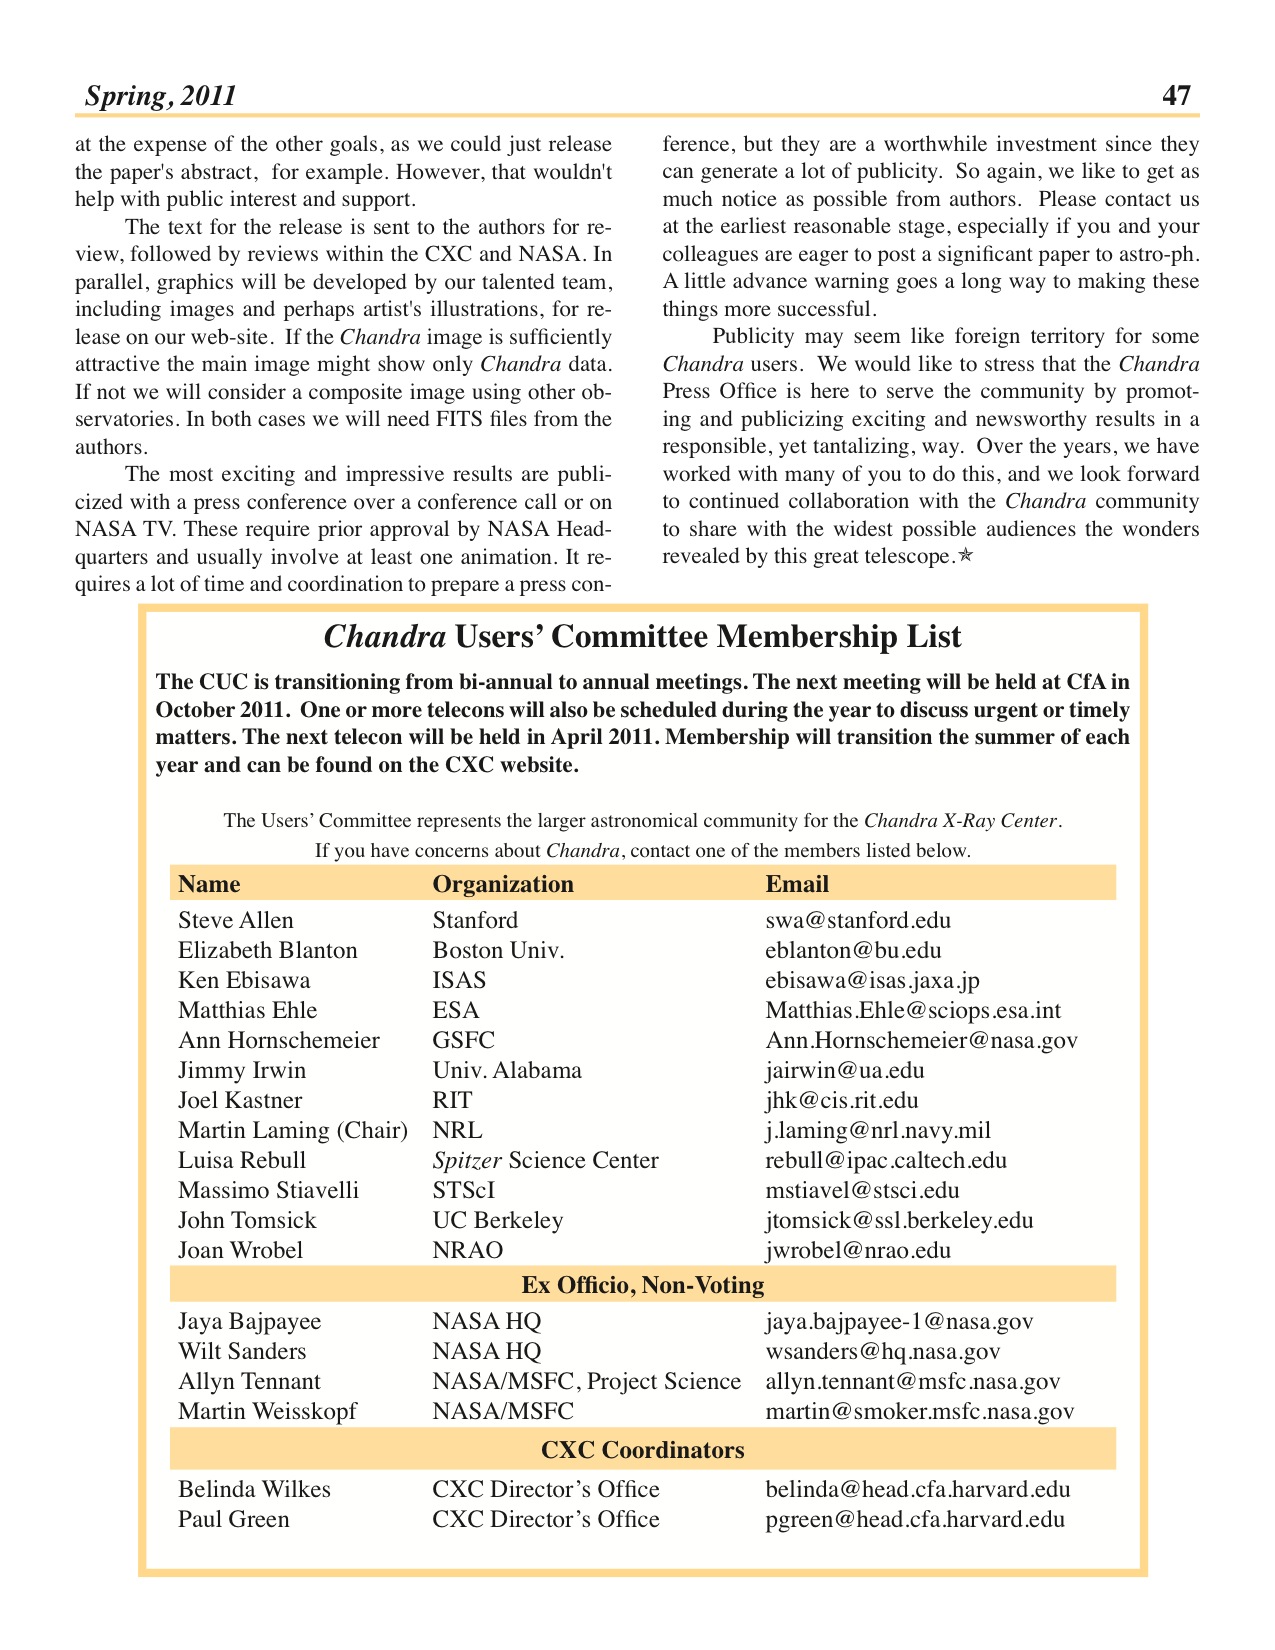 Page 47 of the Chandra Newsletter, issue 18.